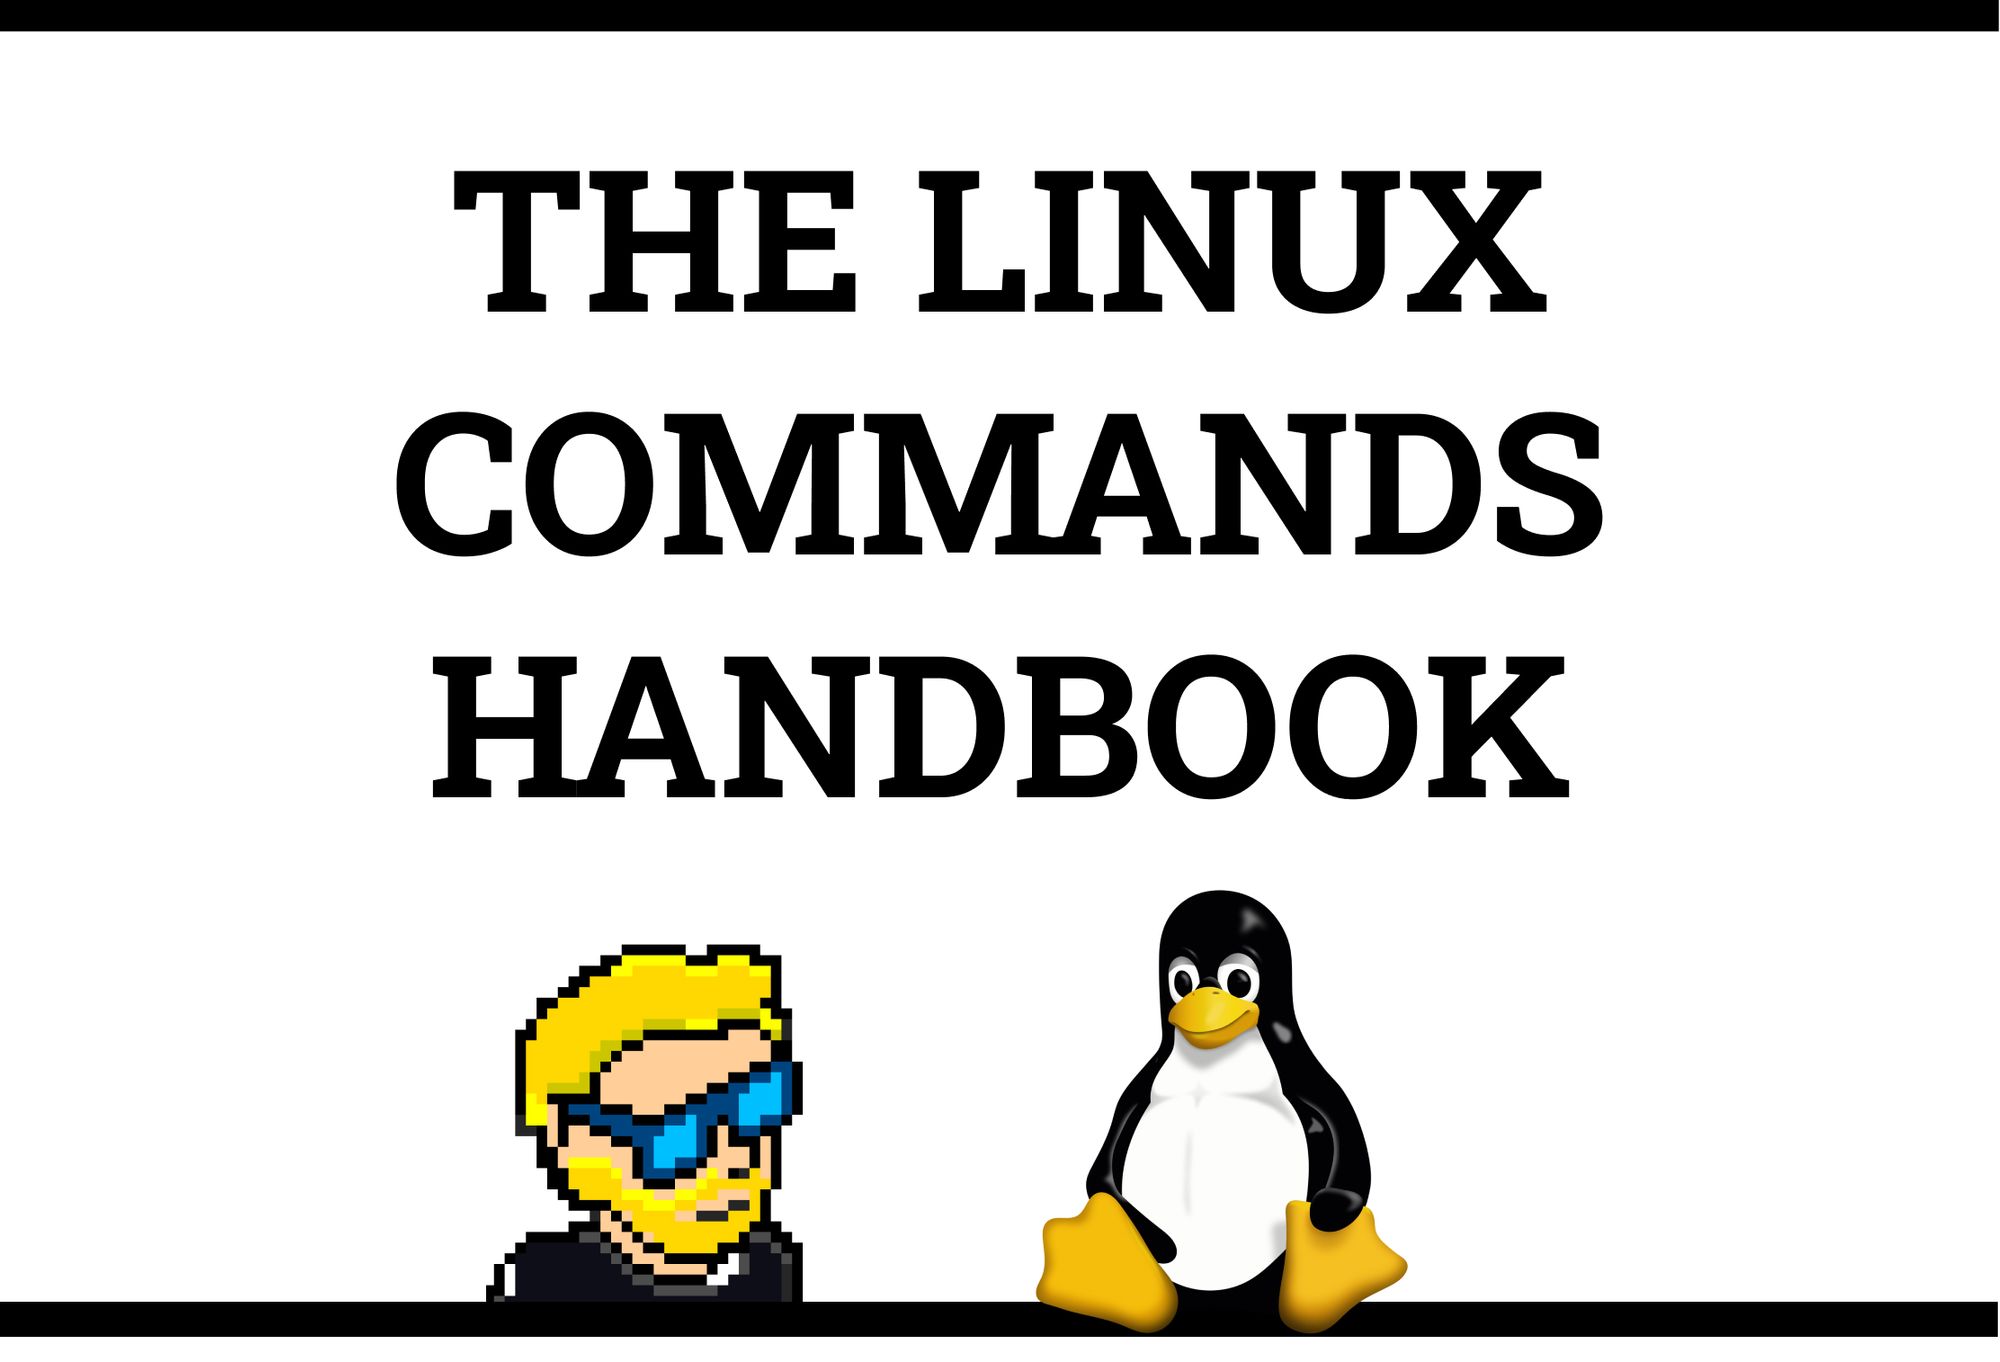 The Linux Command Handbook Learn Linux Commands For Beginners